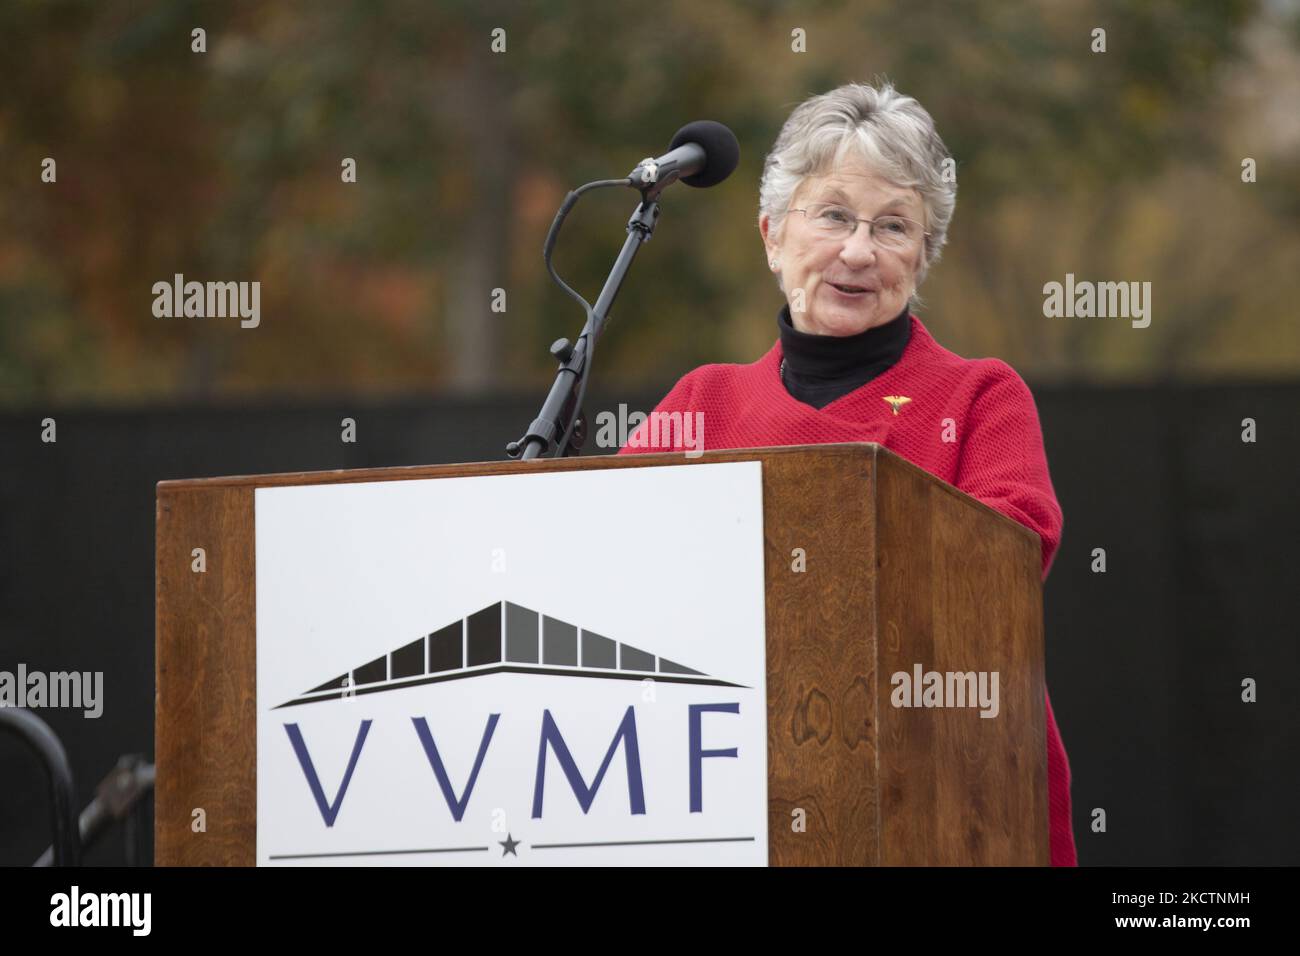 Lt. Grace Moore, Vietnam Veteran and retired member of the U.S. Army Nurse Corps, speaks to the crowd at the annual Veterans Day Observance at the Wall on Thursday, November 11, 2021 at the Vietnam Veterans Memorial in Washington, D.C. (Photo by Zach Brien/NurPhoto) Stock Photo